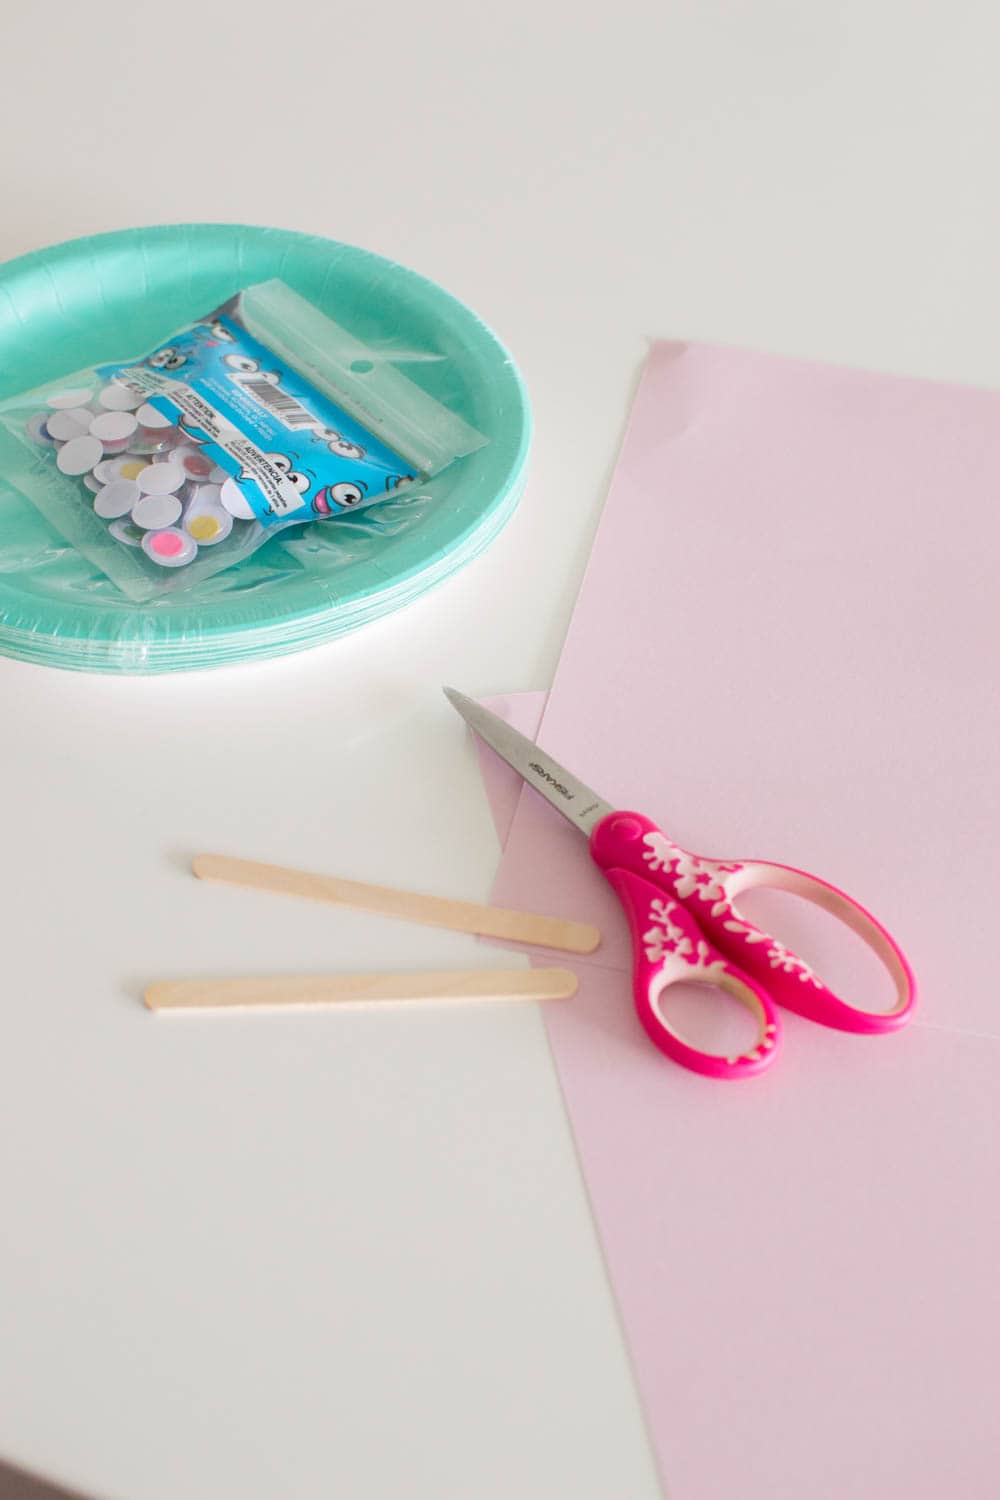 Supplies required to make a Jelly Fish Paper Plate